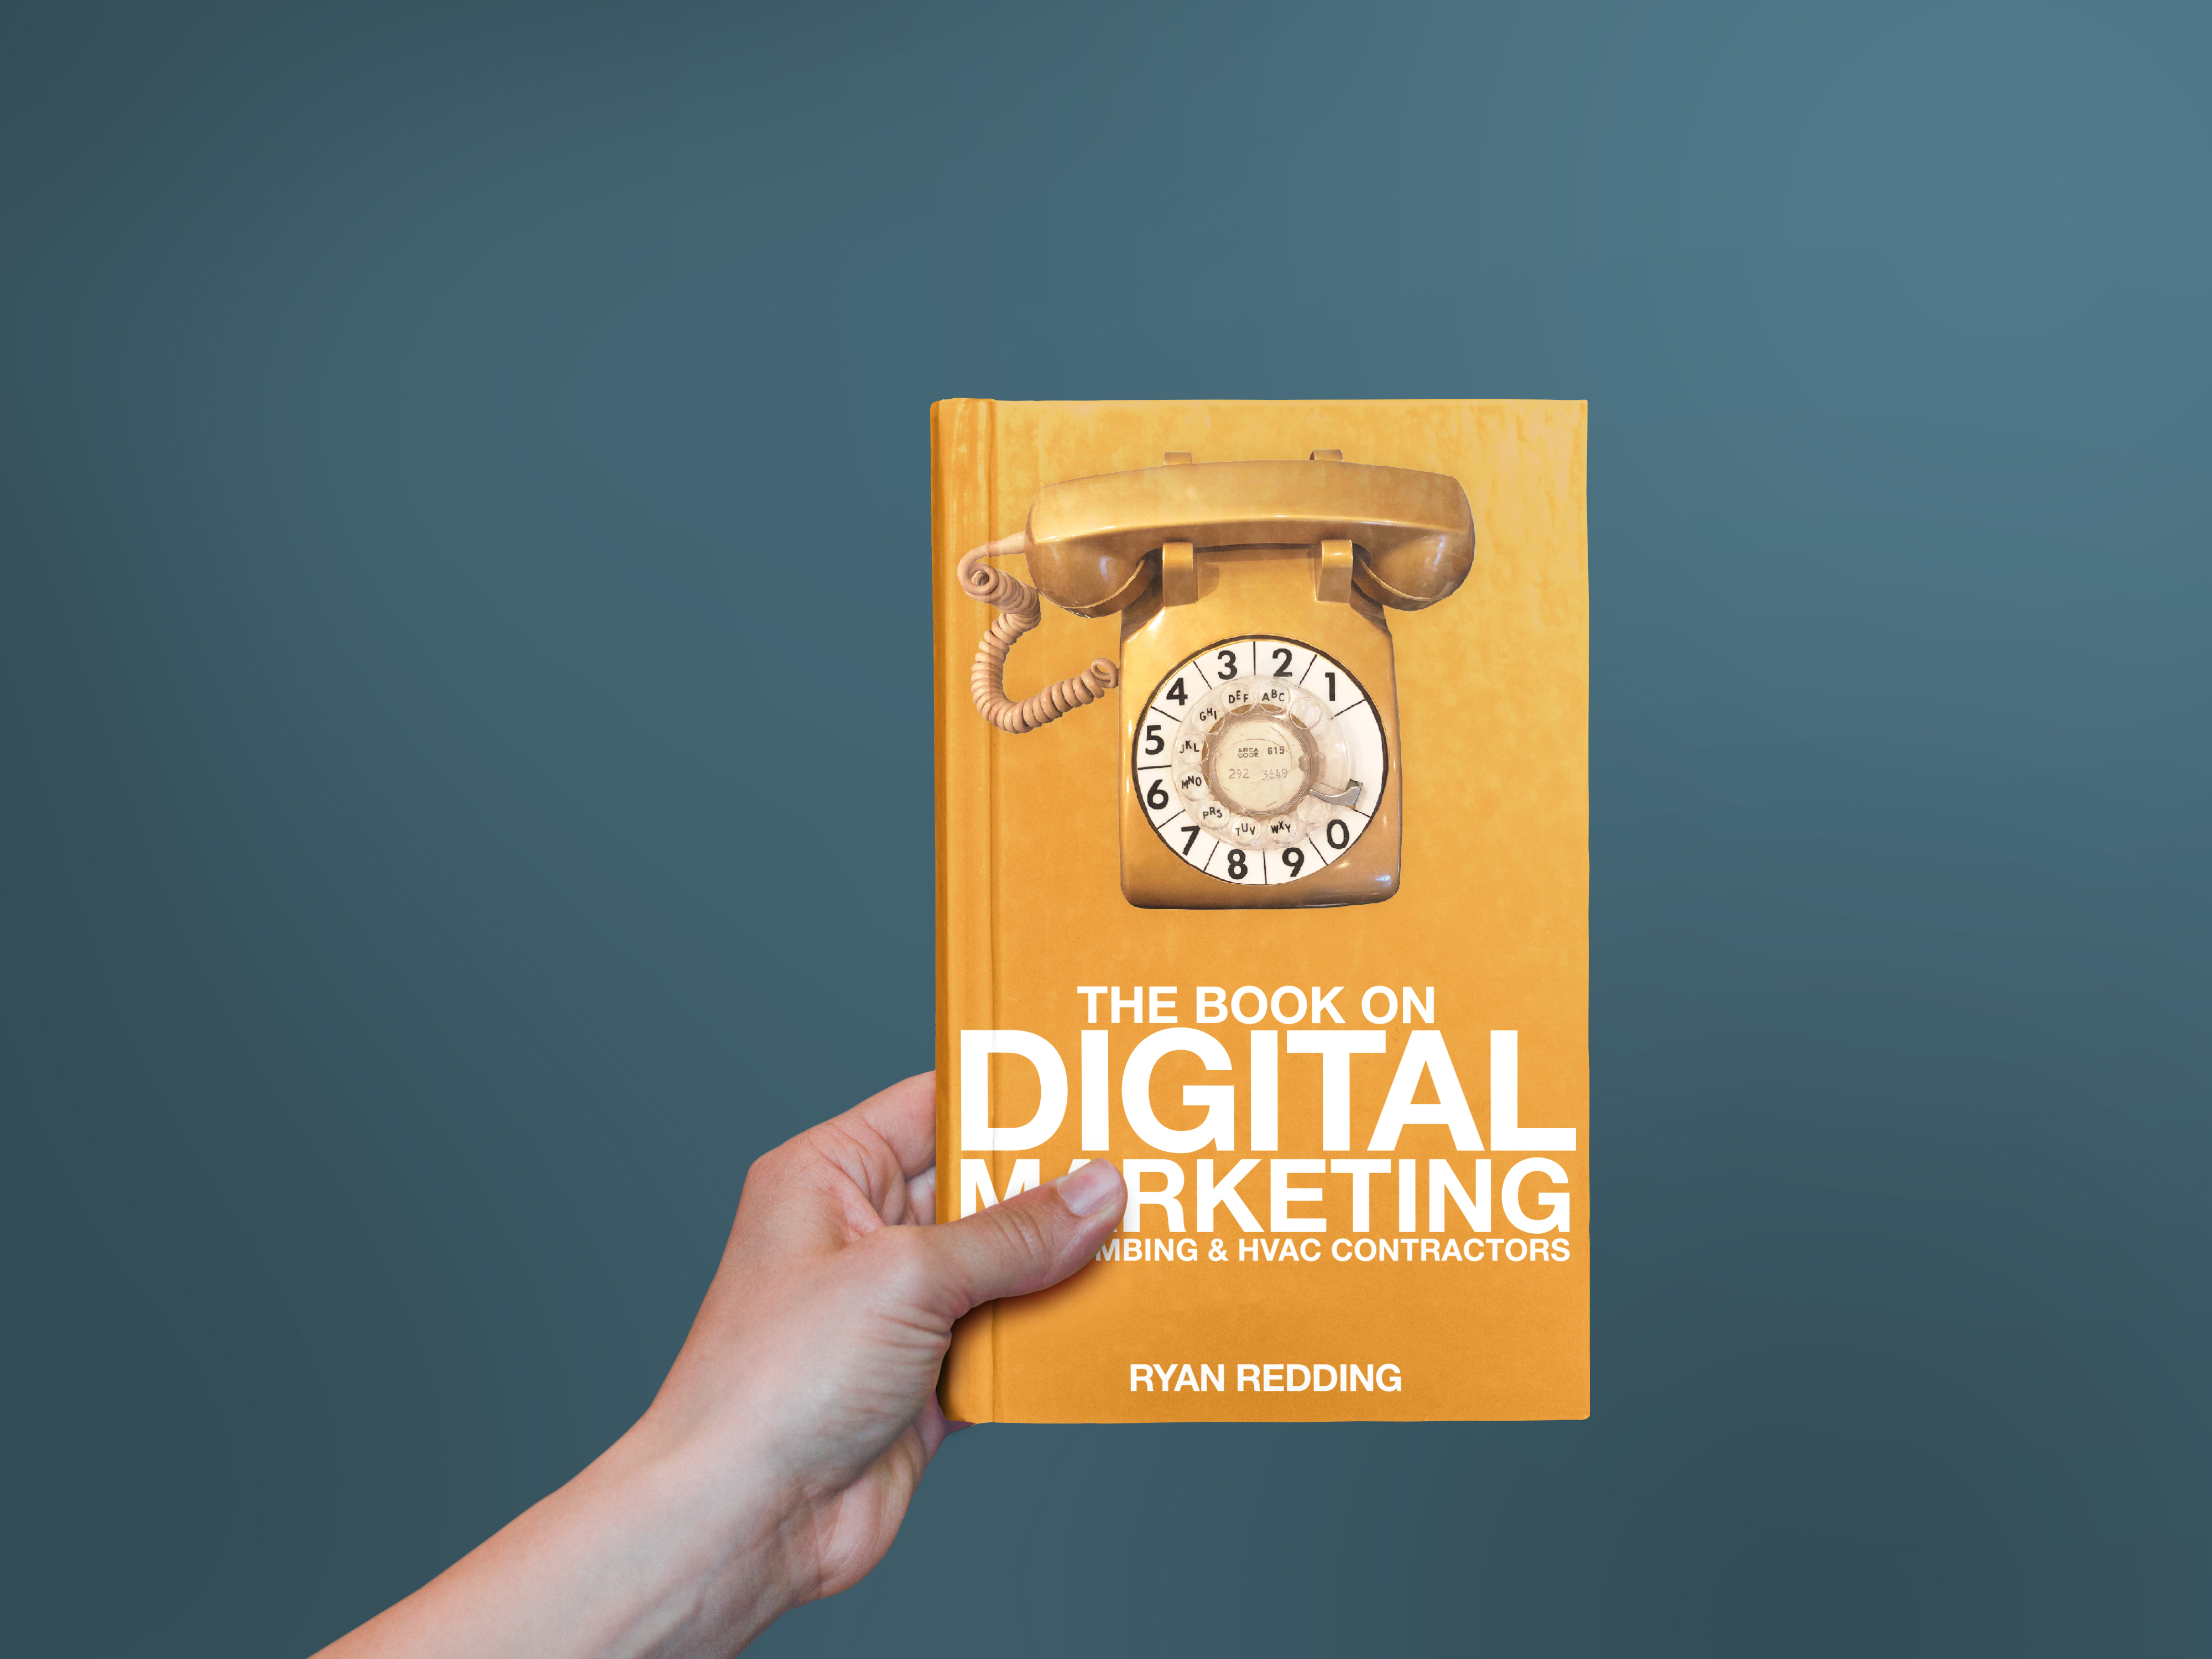 The Book On DIgital Marketing for Plumbing & HVAC Contractors